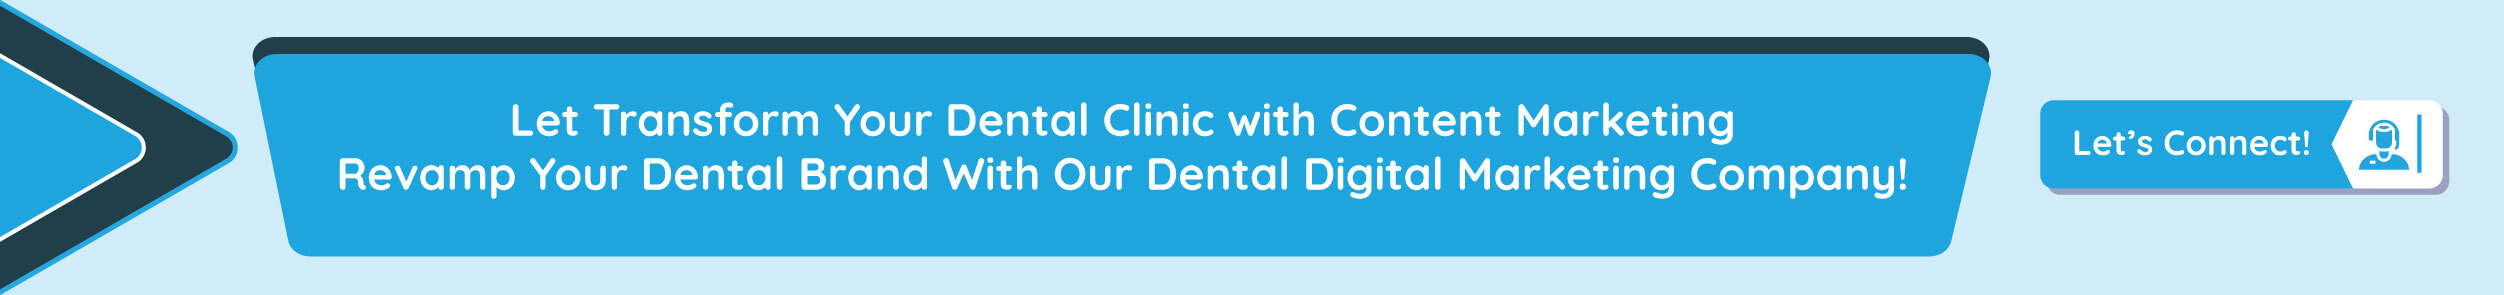 Let-Transform-Your-Dental-Clinic-with-Content-Marketing